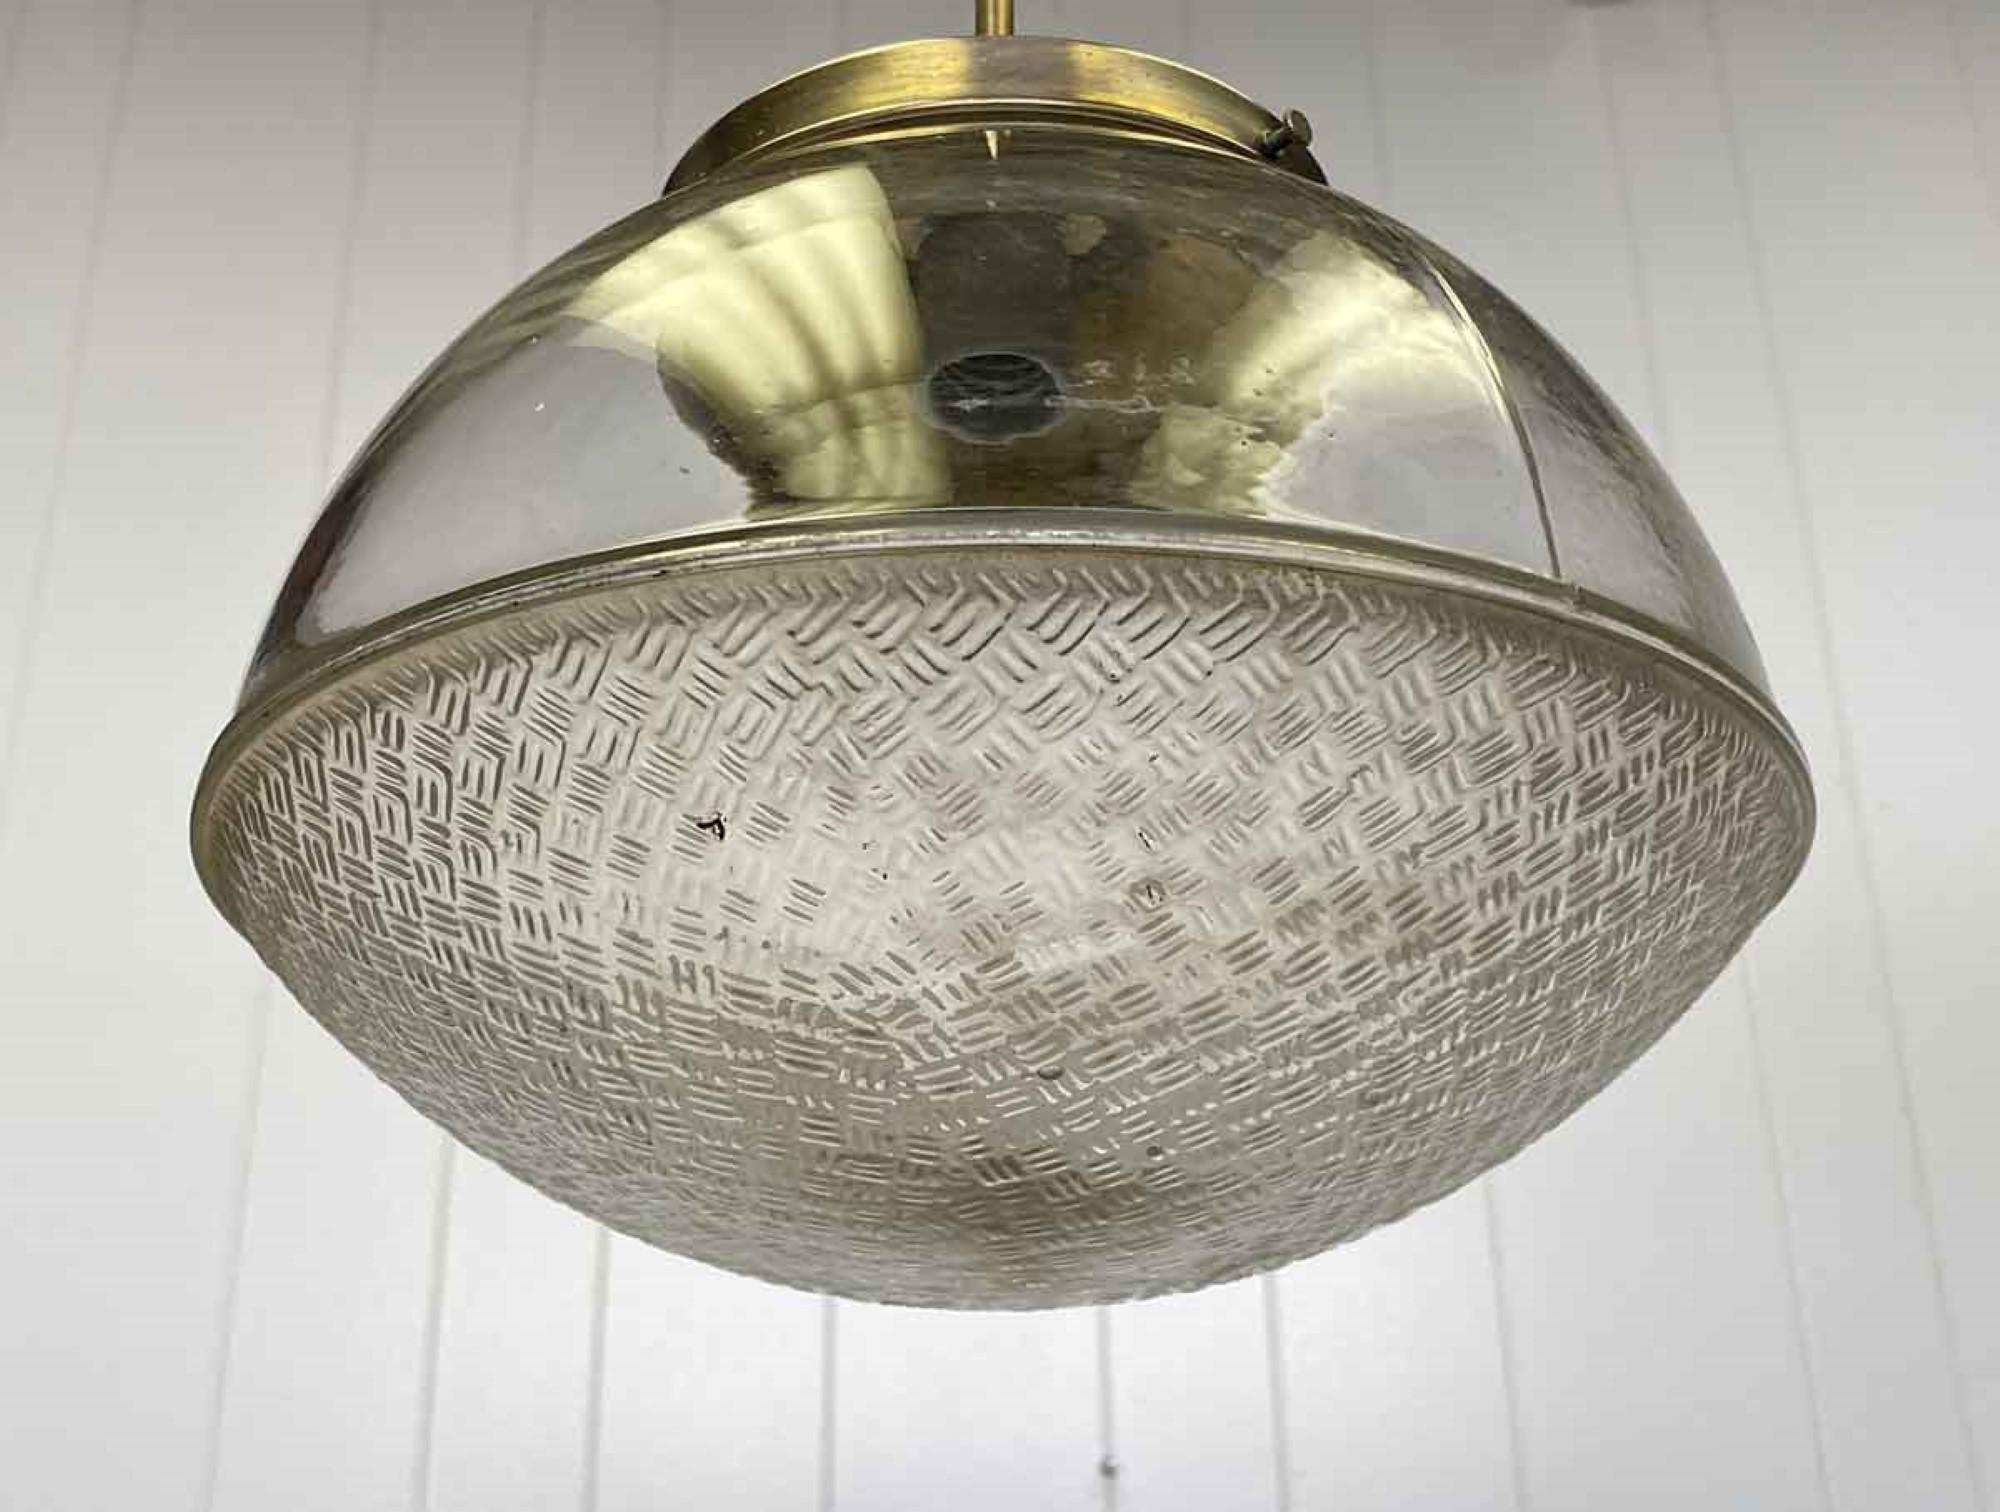 Early 20th Century 1920s Patterned Bottom Glass Globe Pendant Light with Brass Hardware